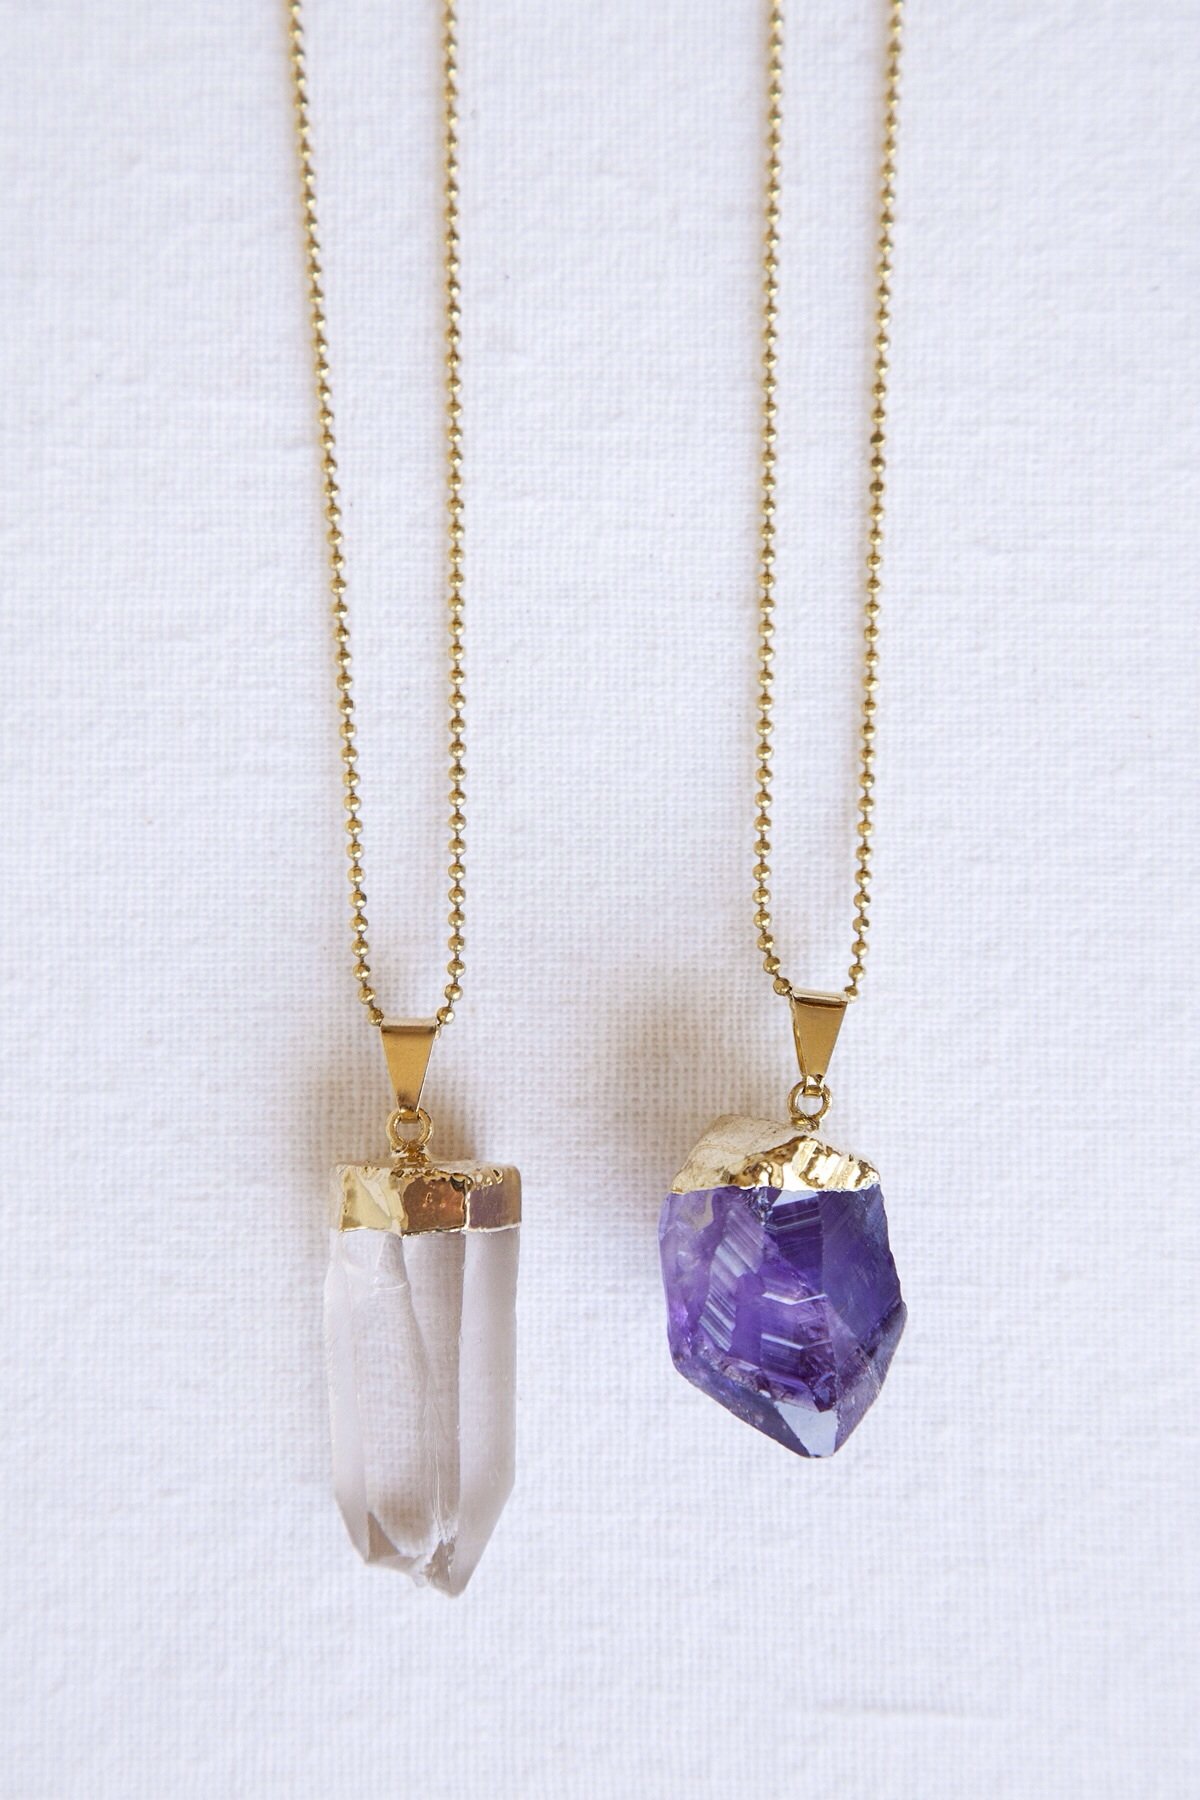 Crystal Chunk Necklace// | Pueblo St. Jewelry Co.